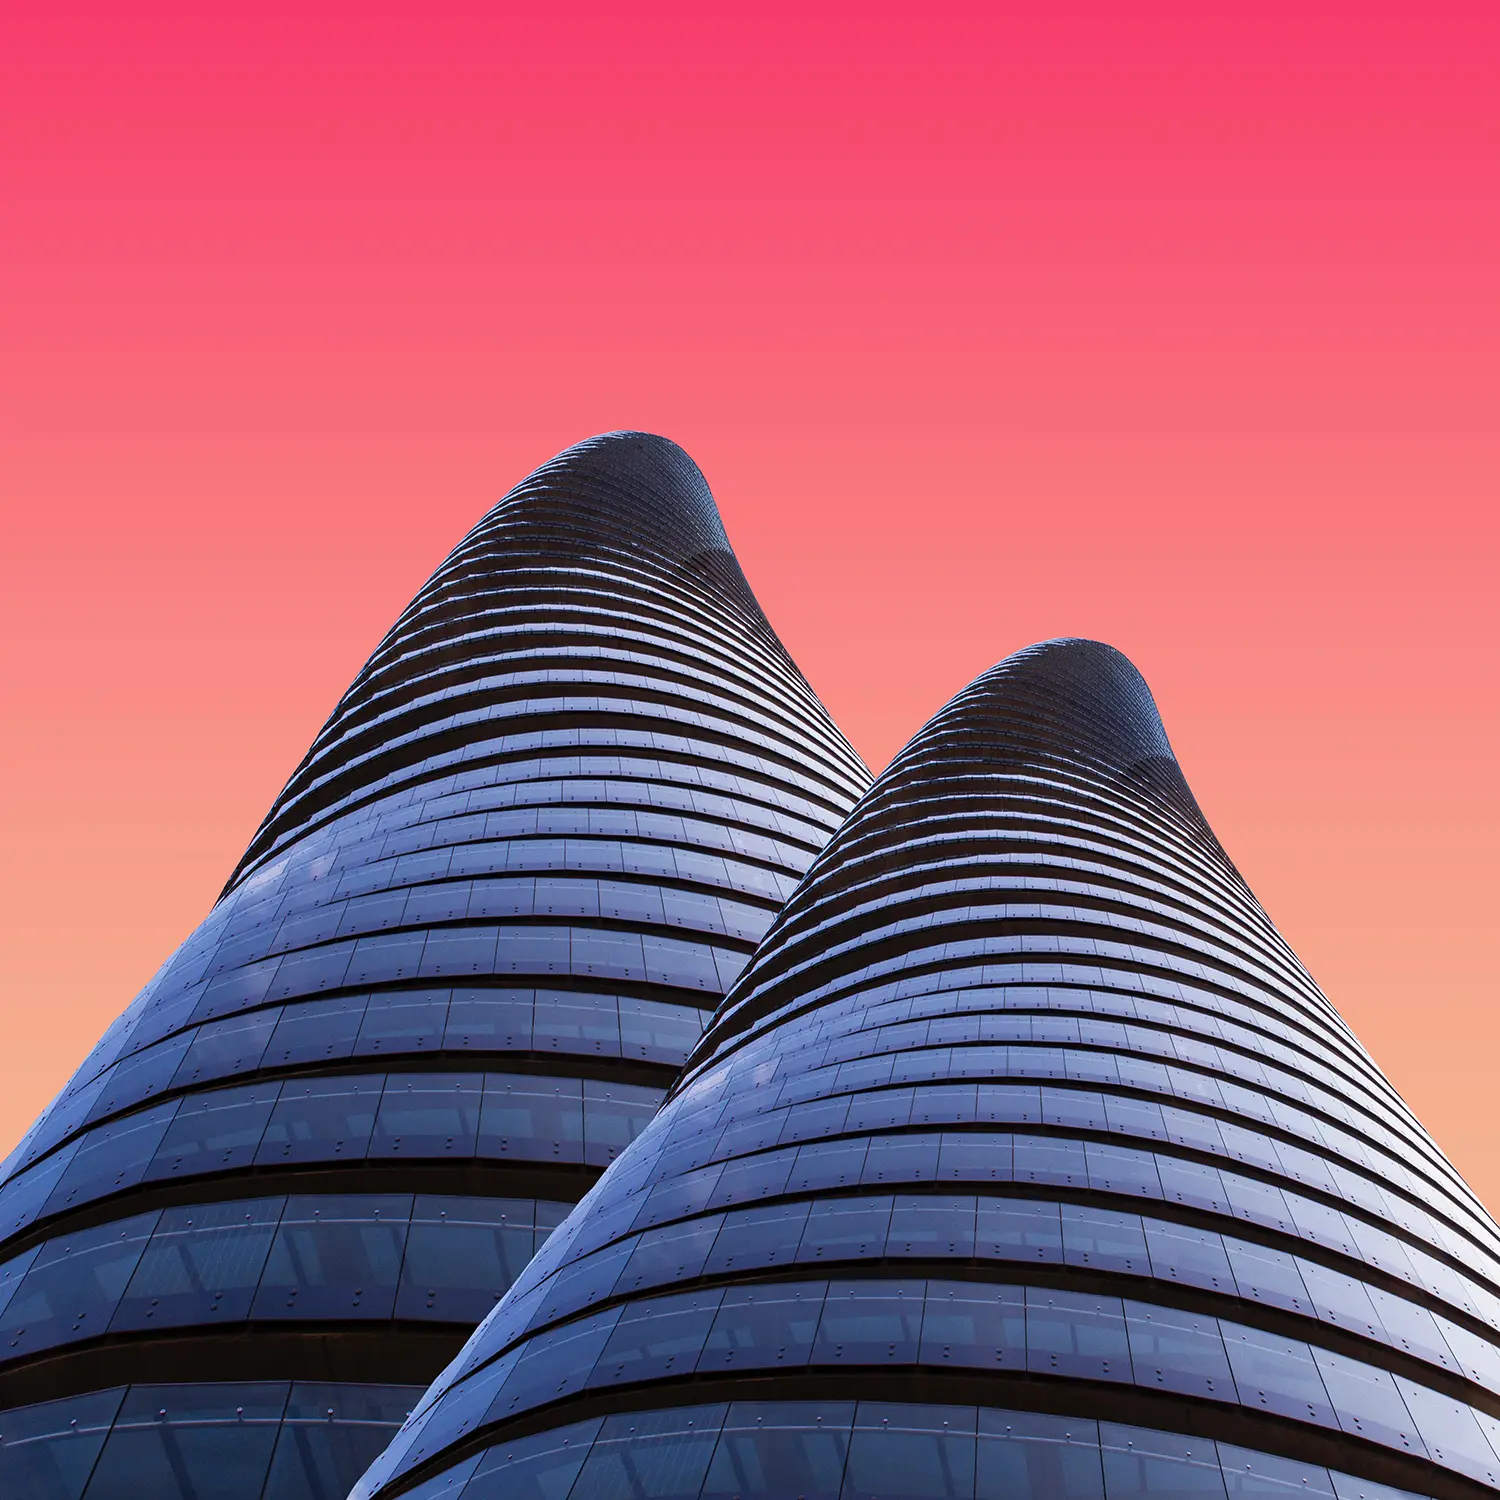 Bottom view of twisting towers